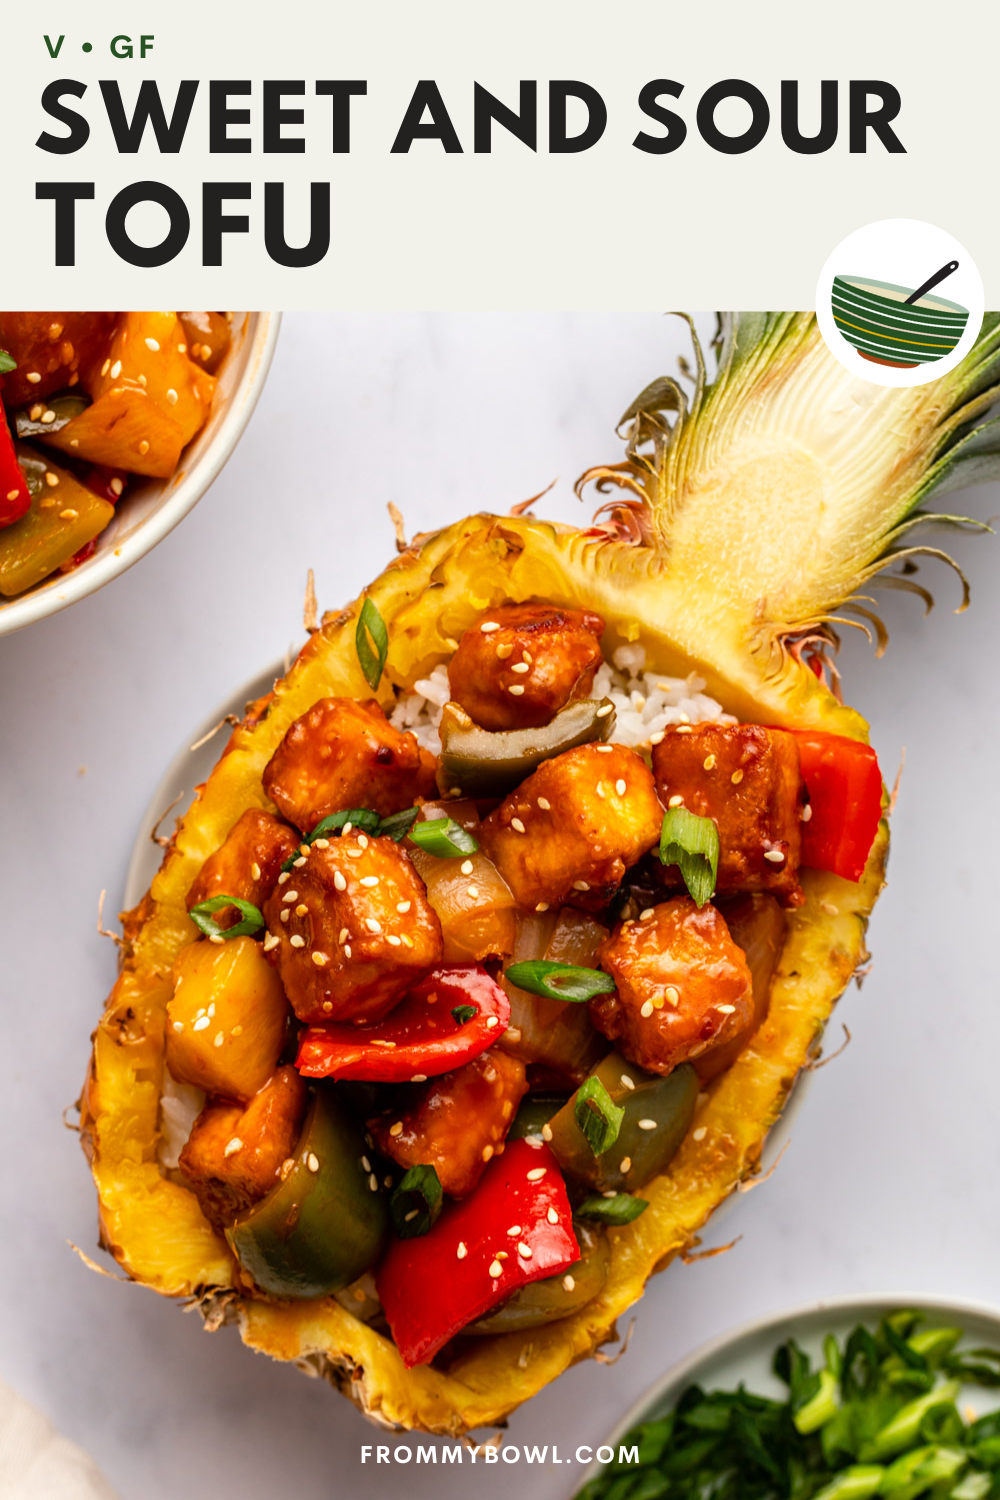 sweet and sour tofu served in a pineapple filled with rice